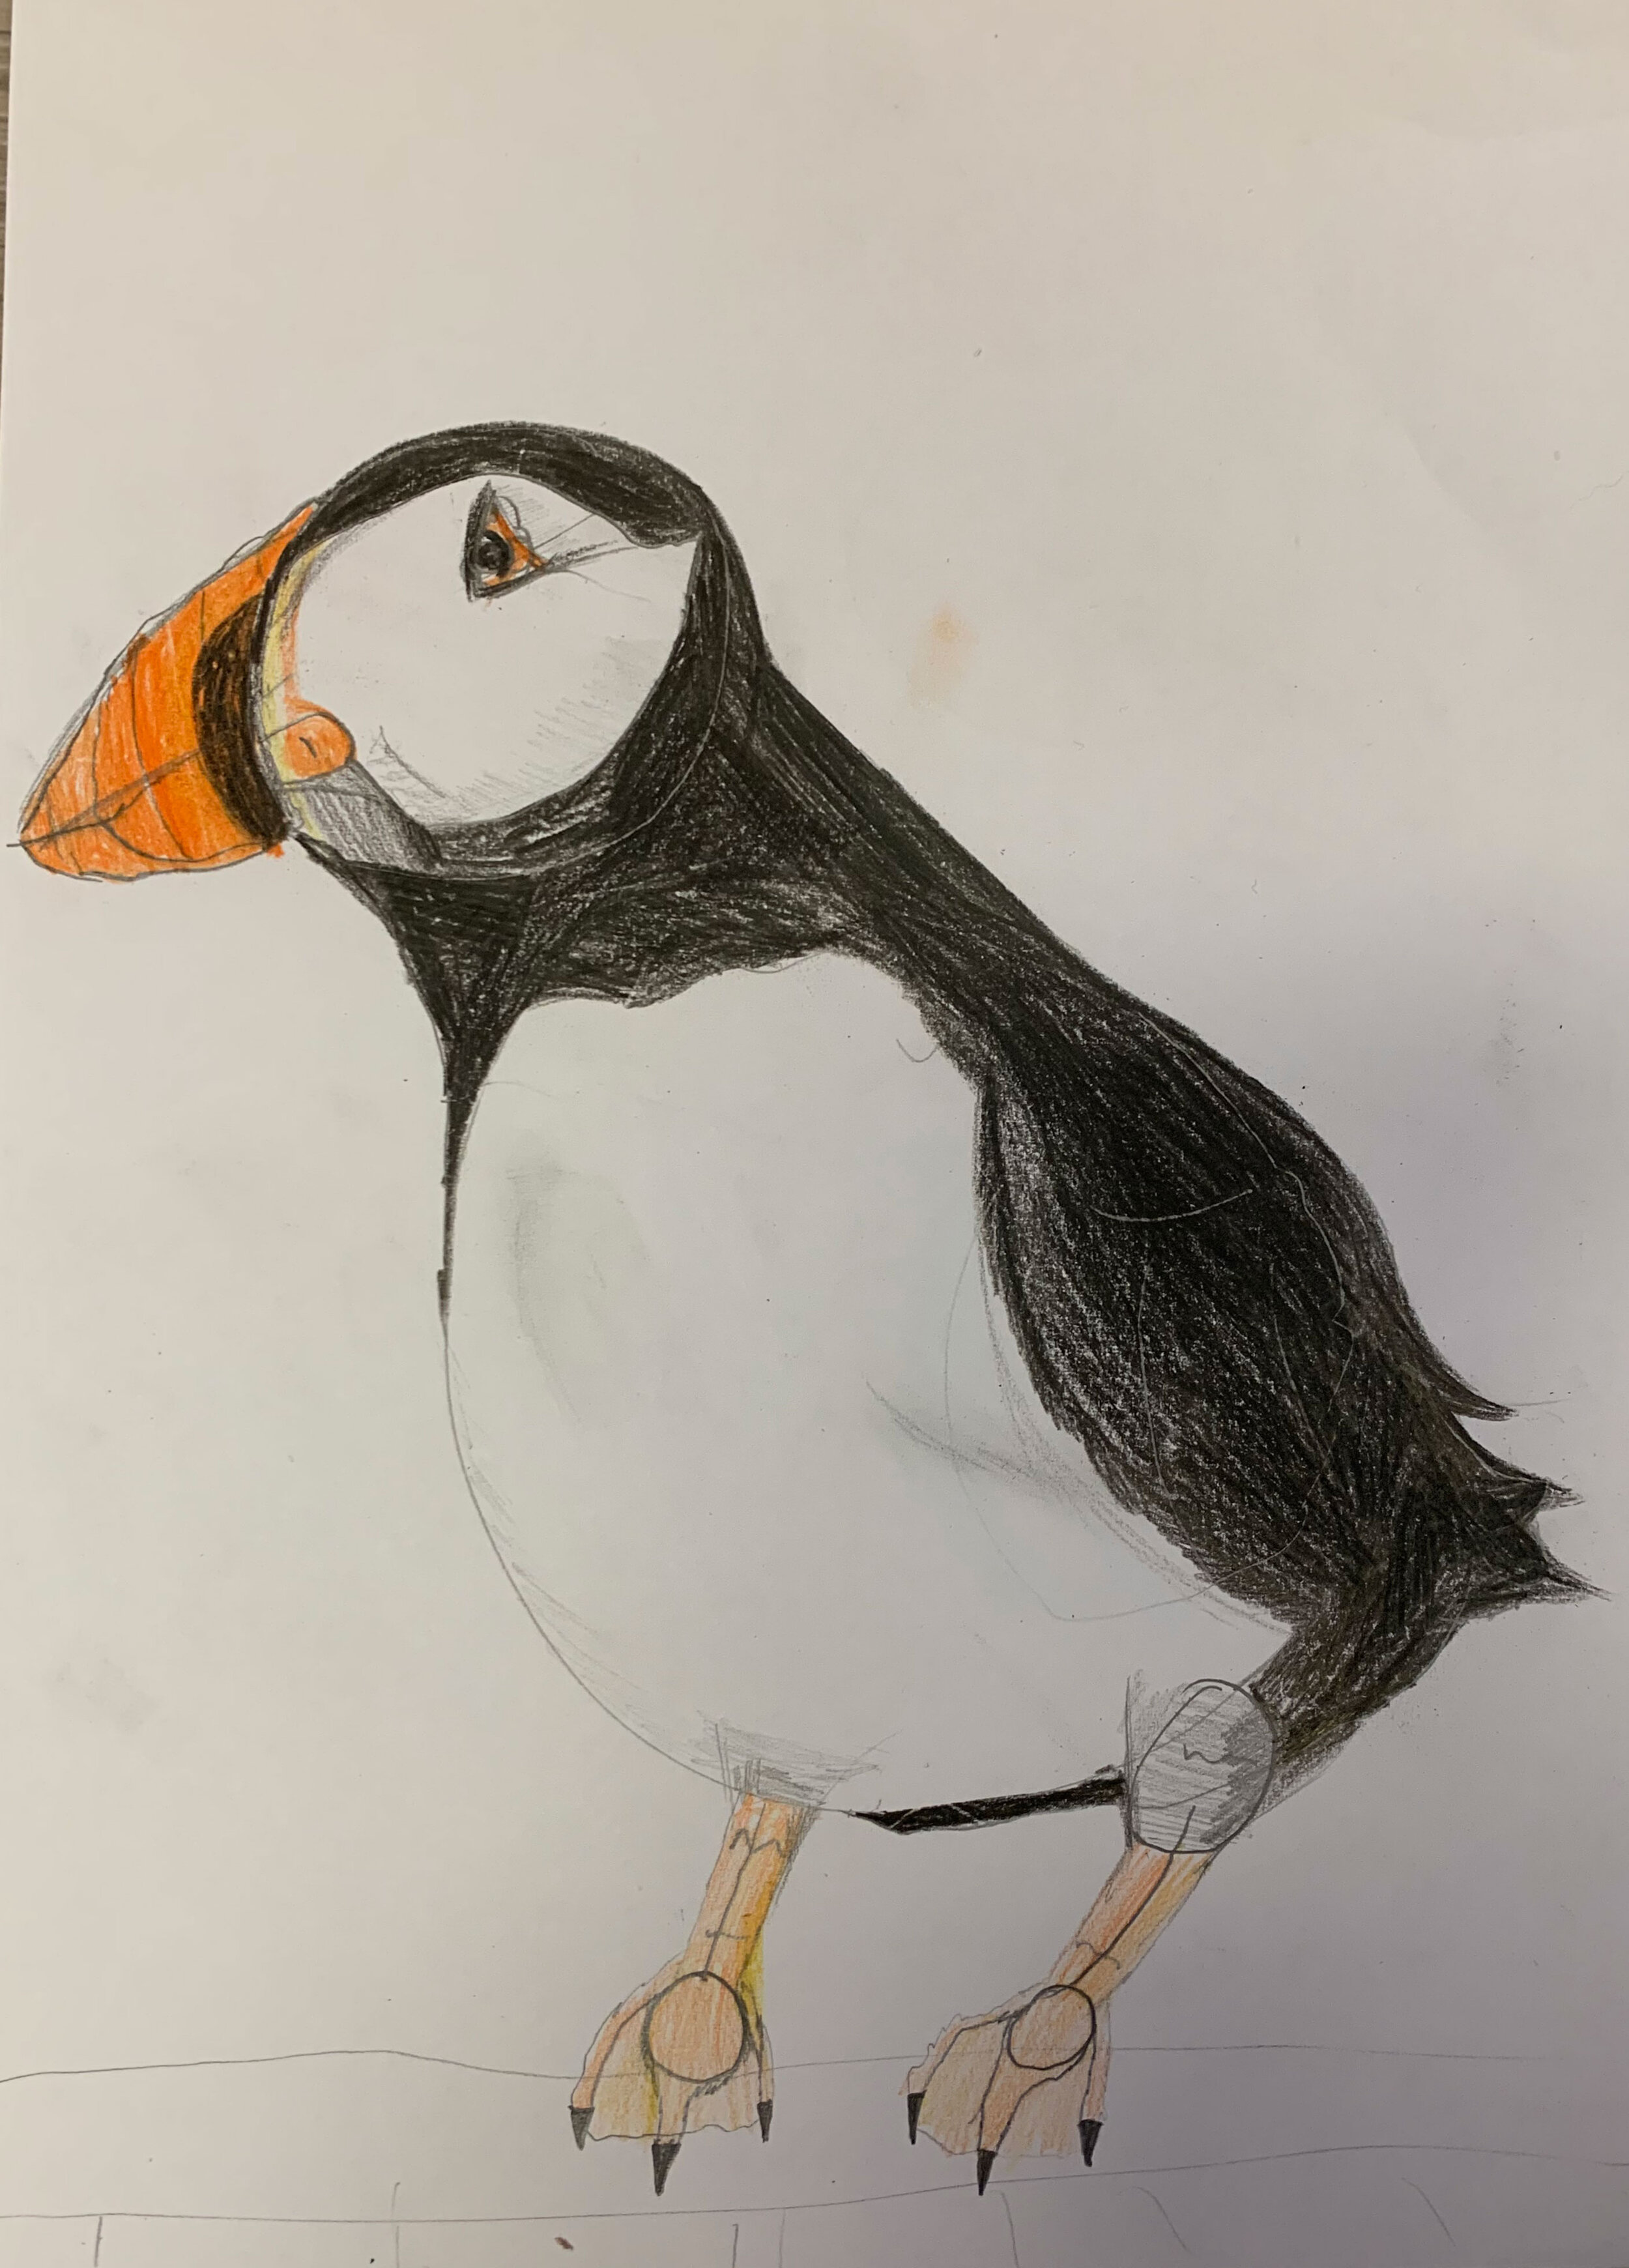 Orkney puffin by Summer Masson age 10